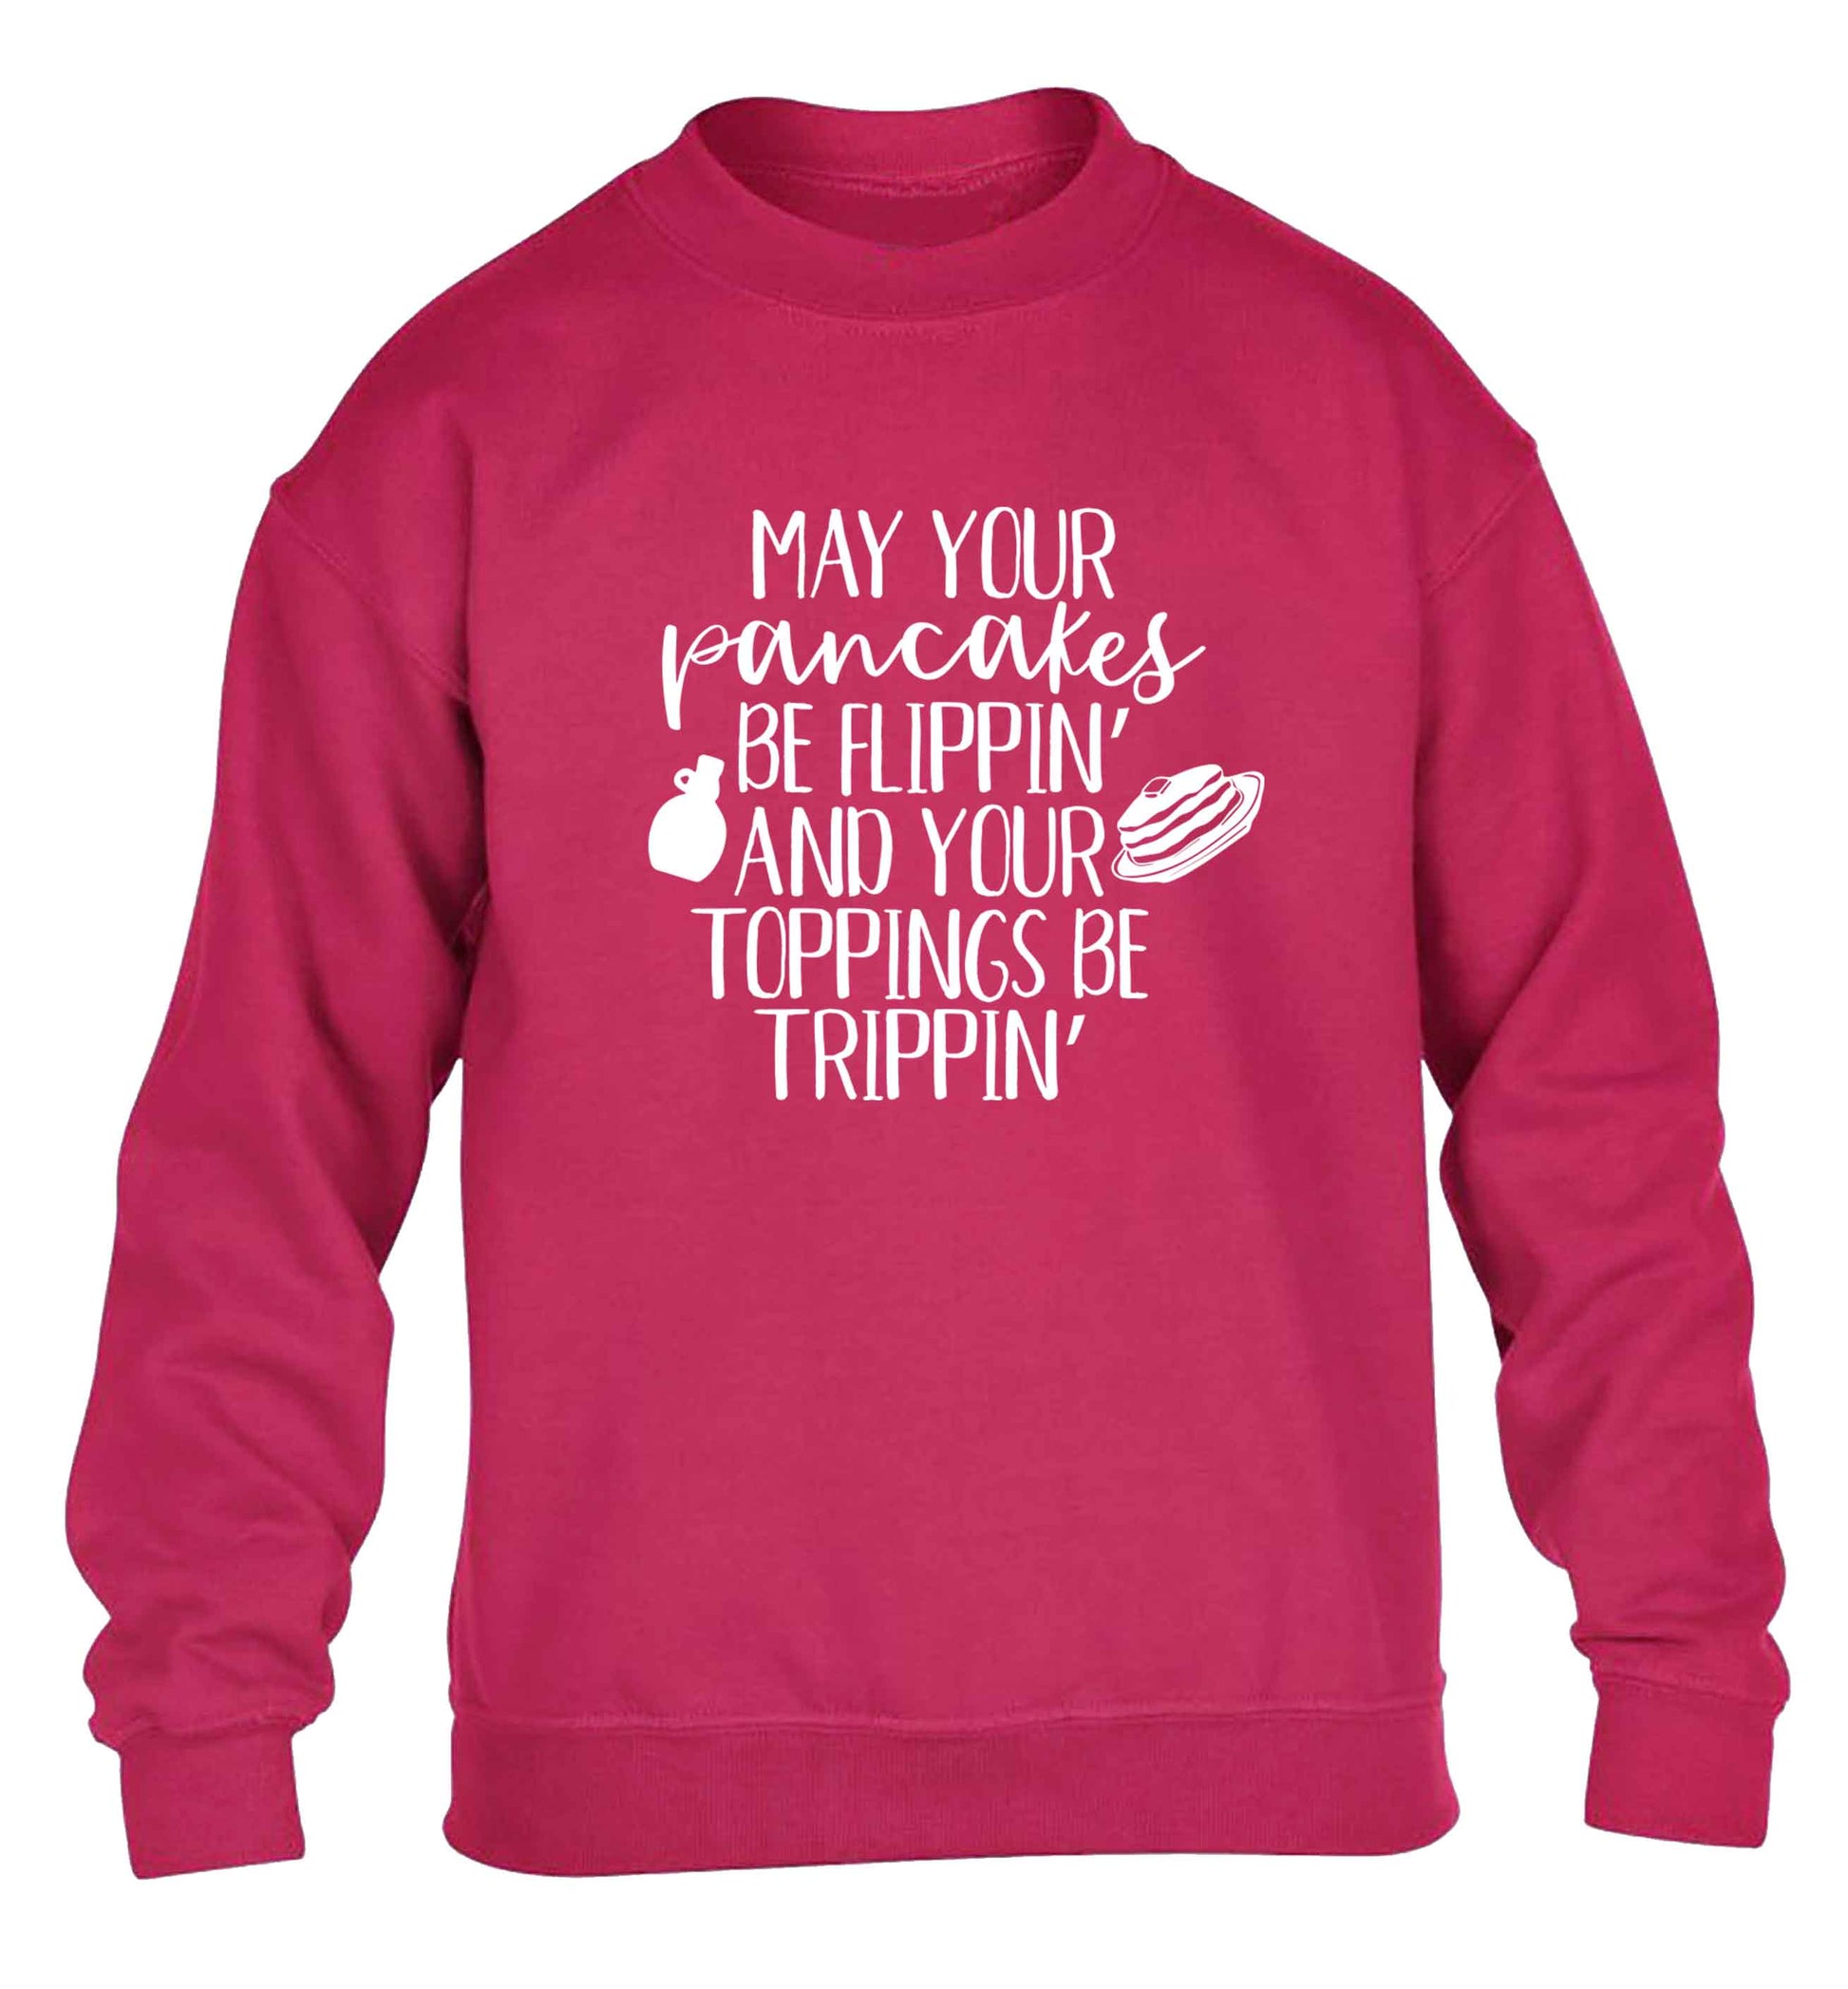 May your pancakes be flippin' and your toppings be trippin' children's pink sweater 12-13 Years